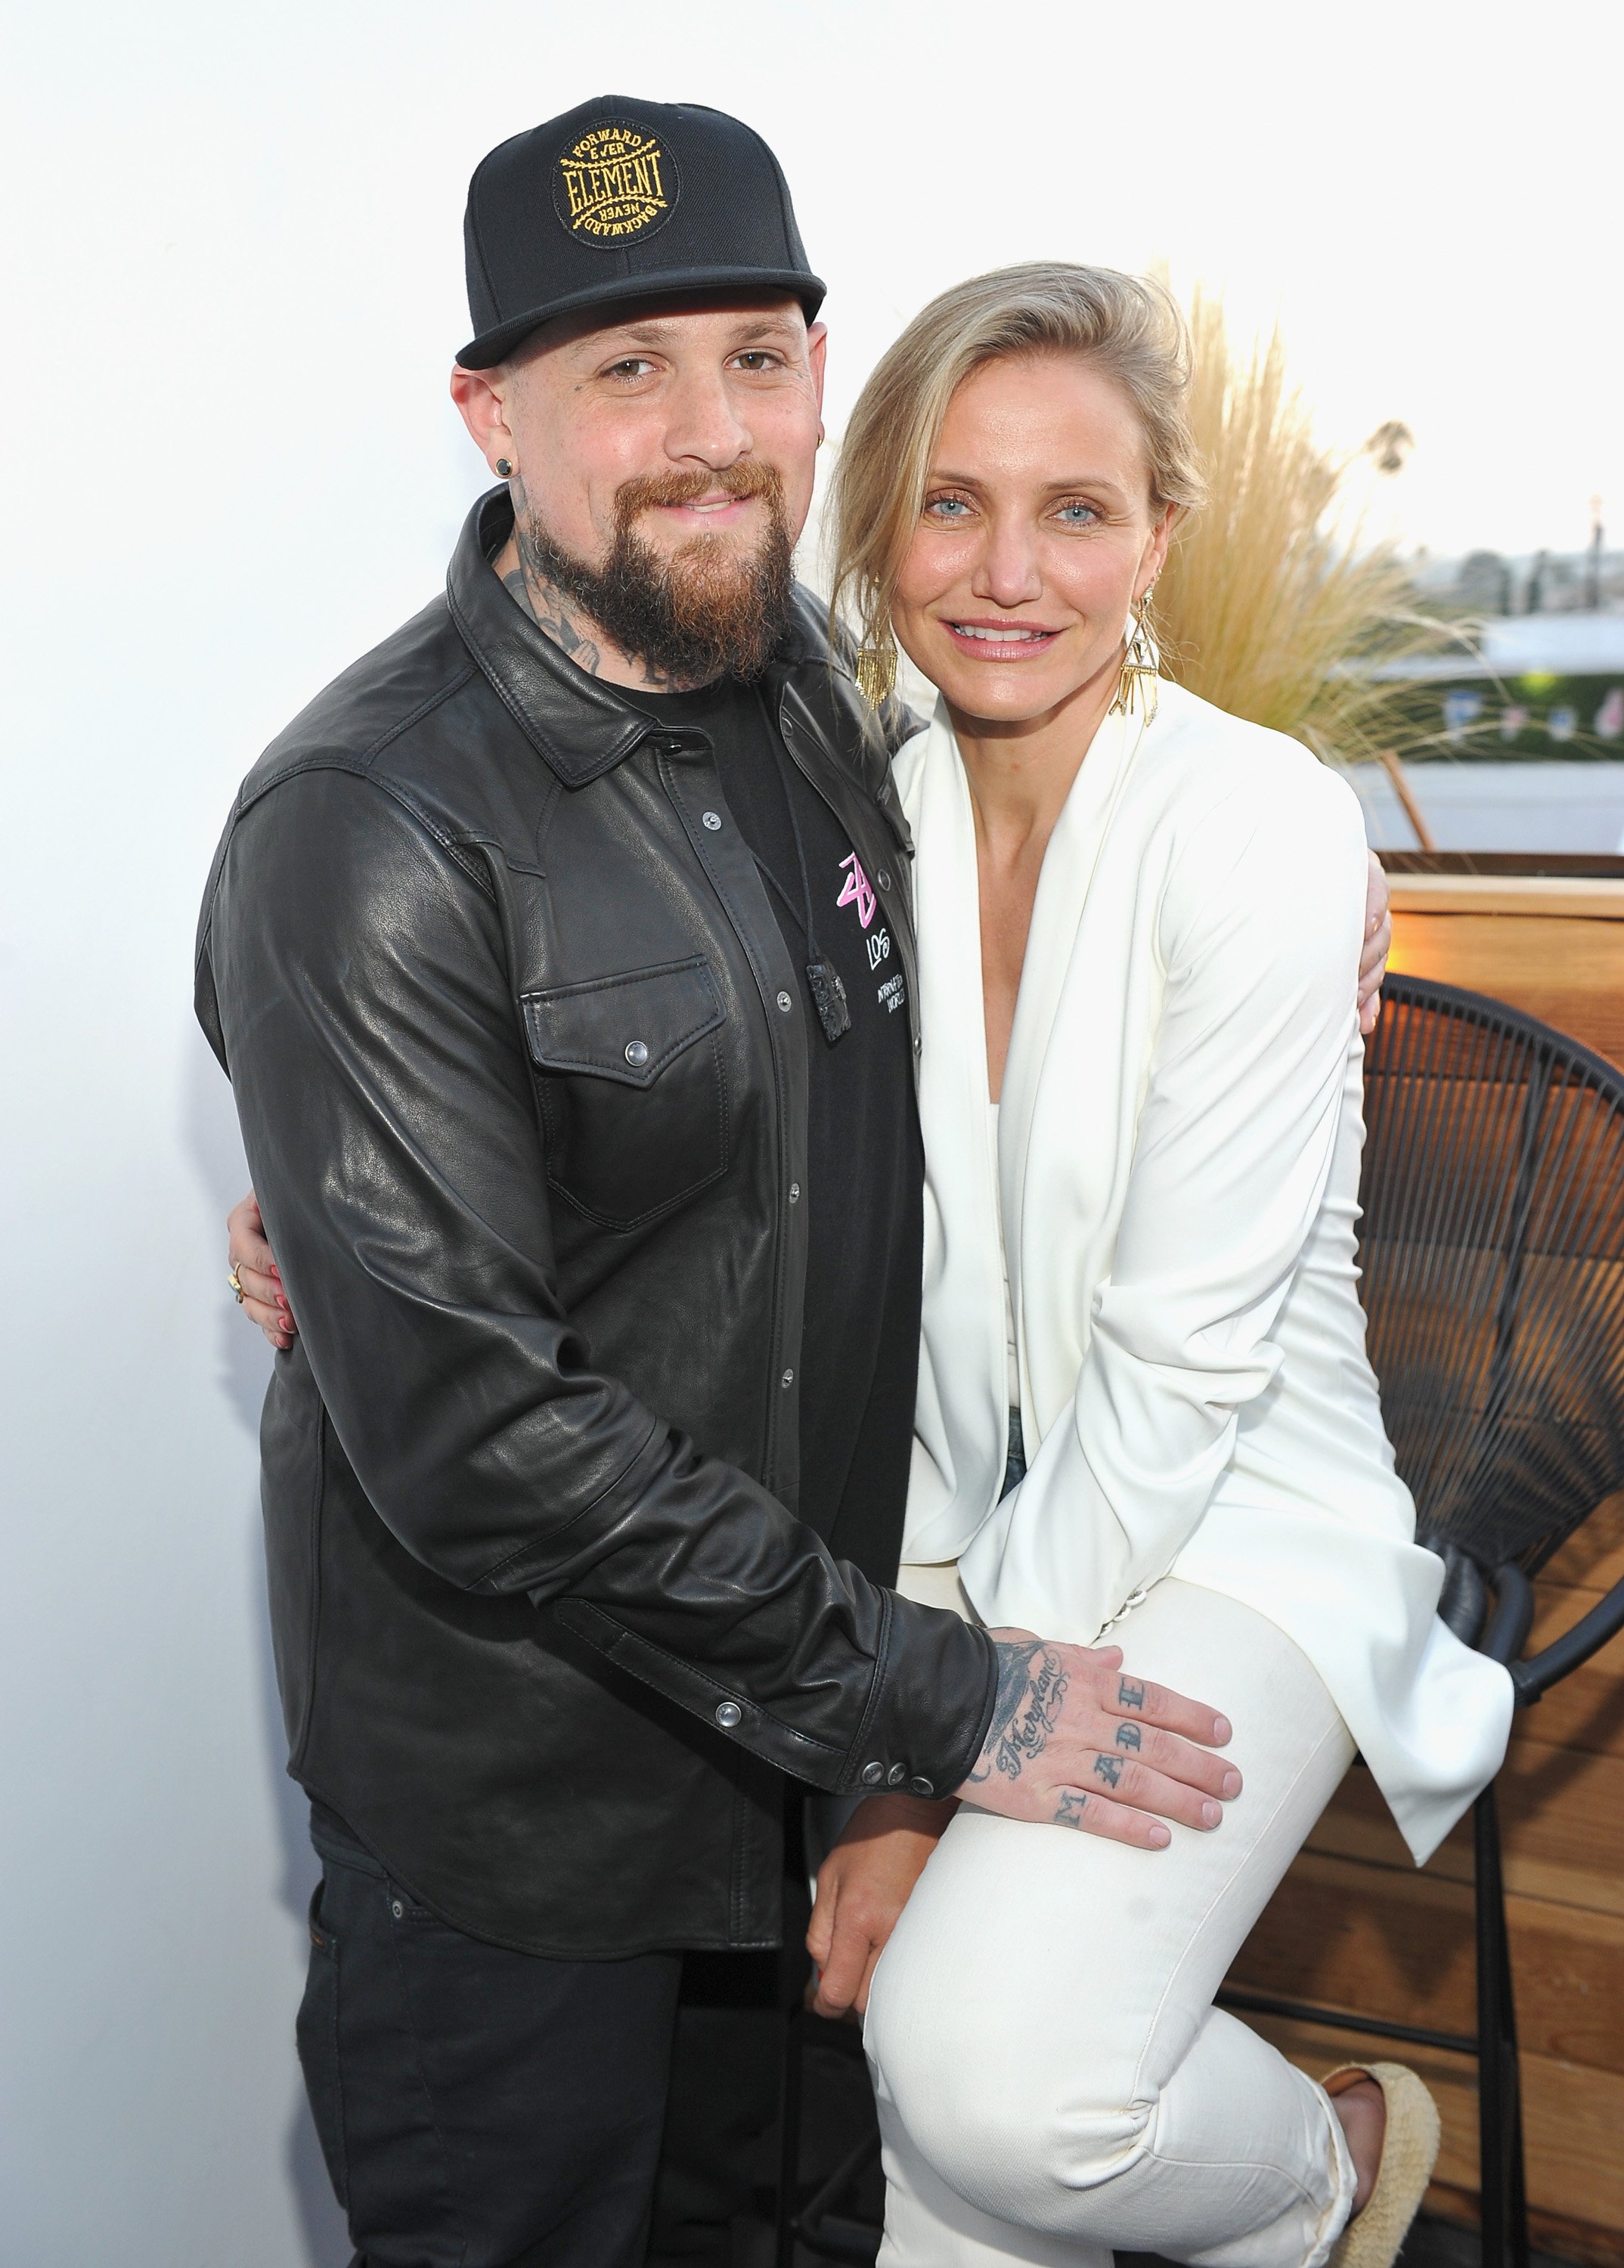 Guitarist Benji Madden and actress Cameron Diaz attend House of Harlow 1960 x REVOLVE on June 2, 2016 in Los Angeles, California ┃Source: Getty Images